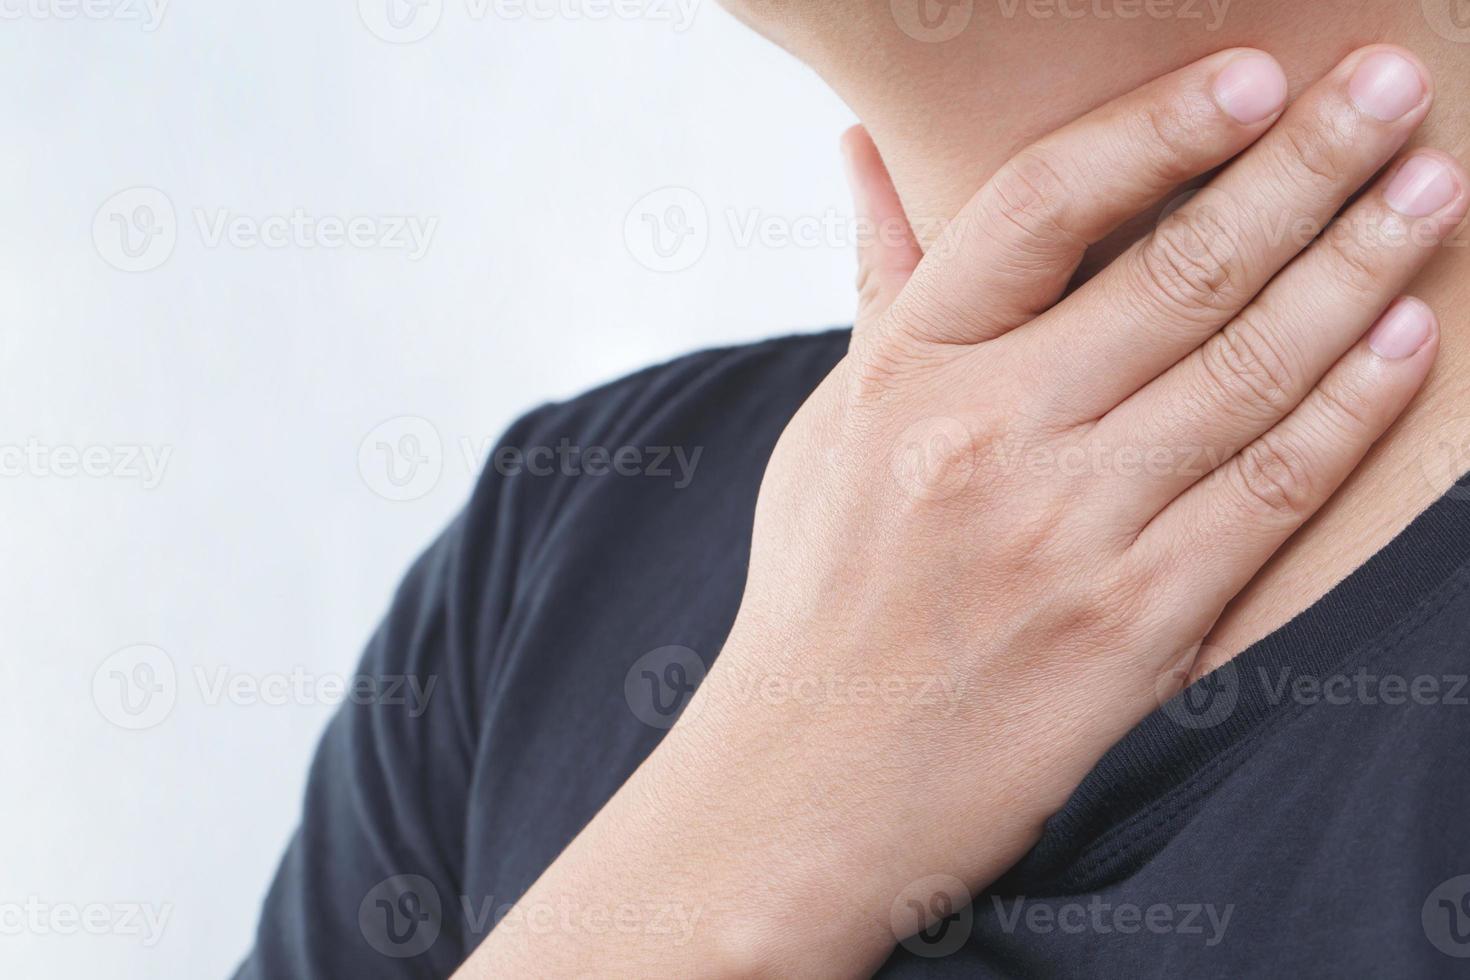 sore throat pain. Closeup of young man sick holding her inflamed throat using hands to touch the ill neck in blue shirt on gray background. Medical and healthcare concept. Focus red on to show pain. photo